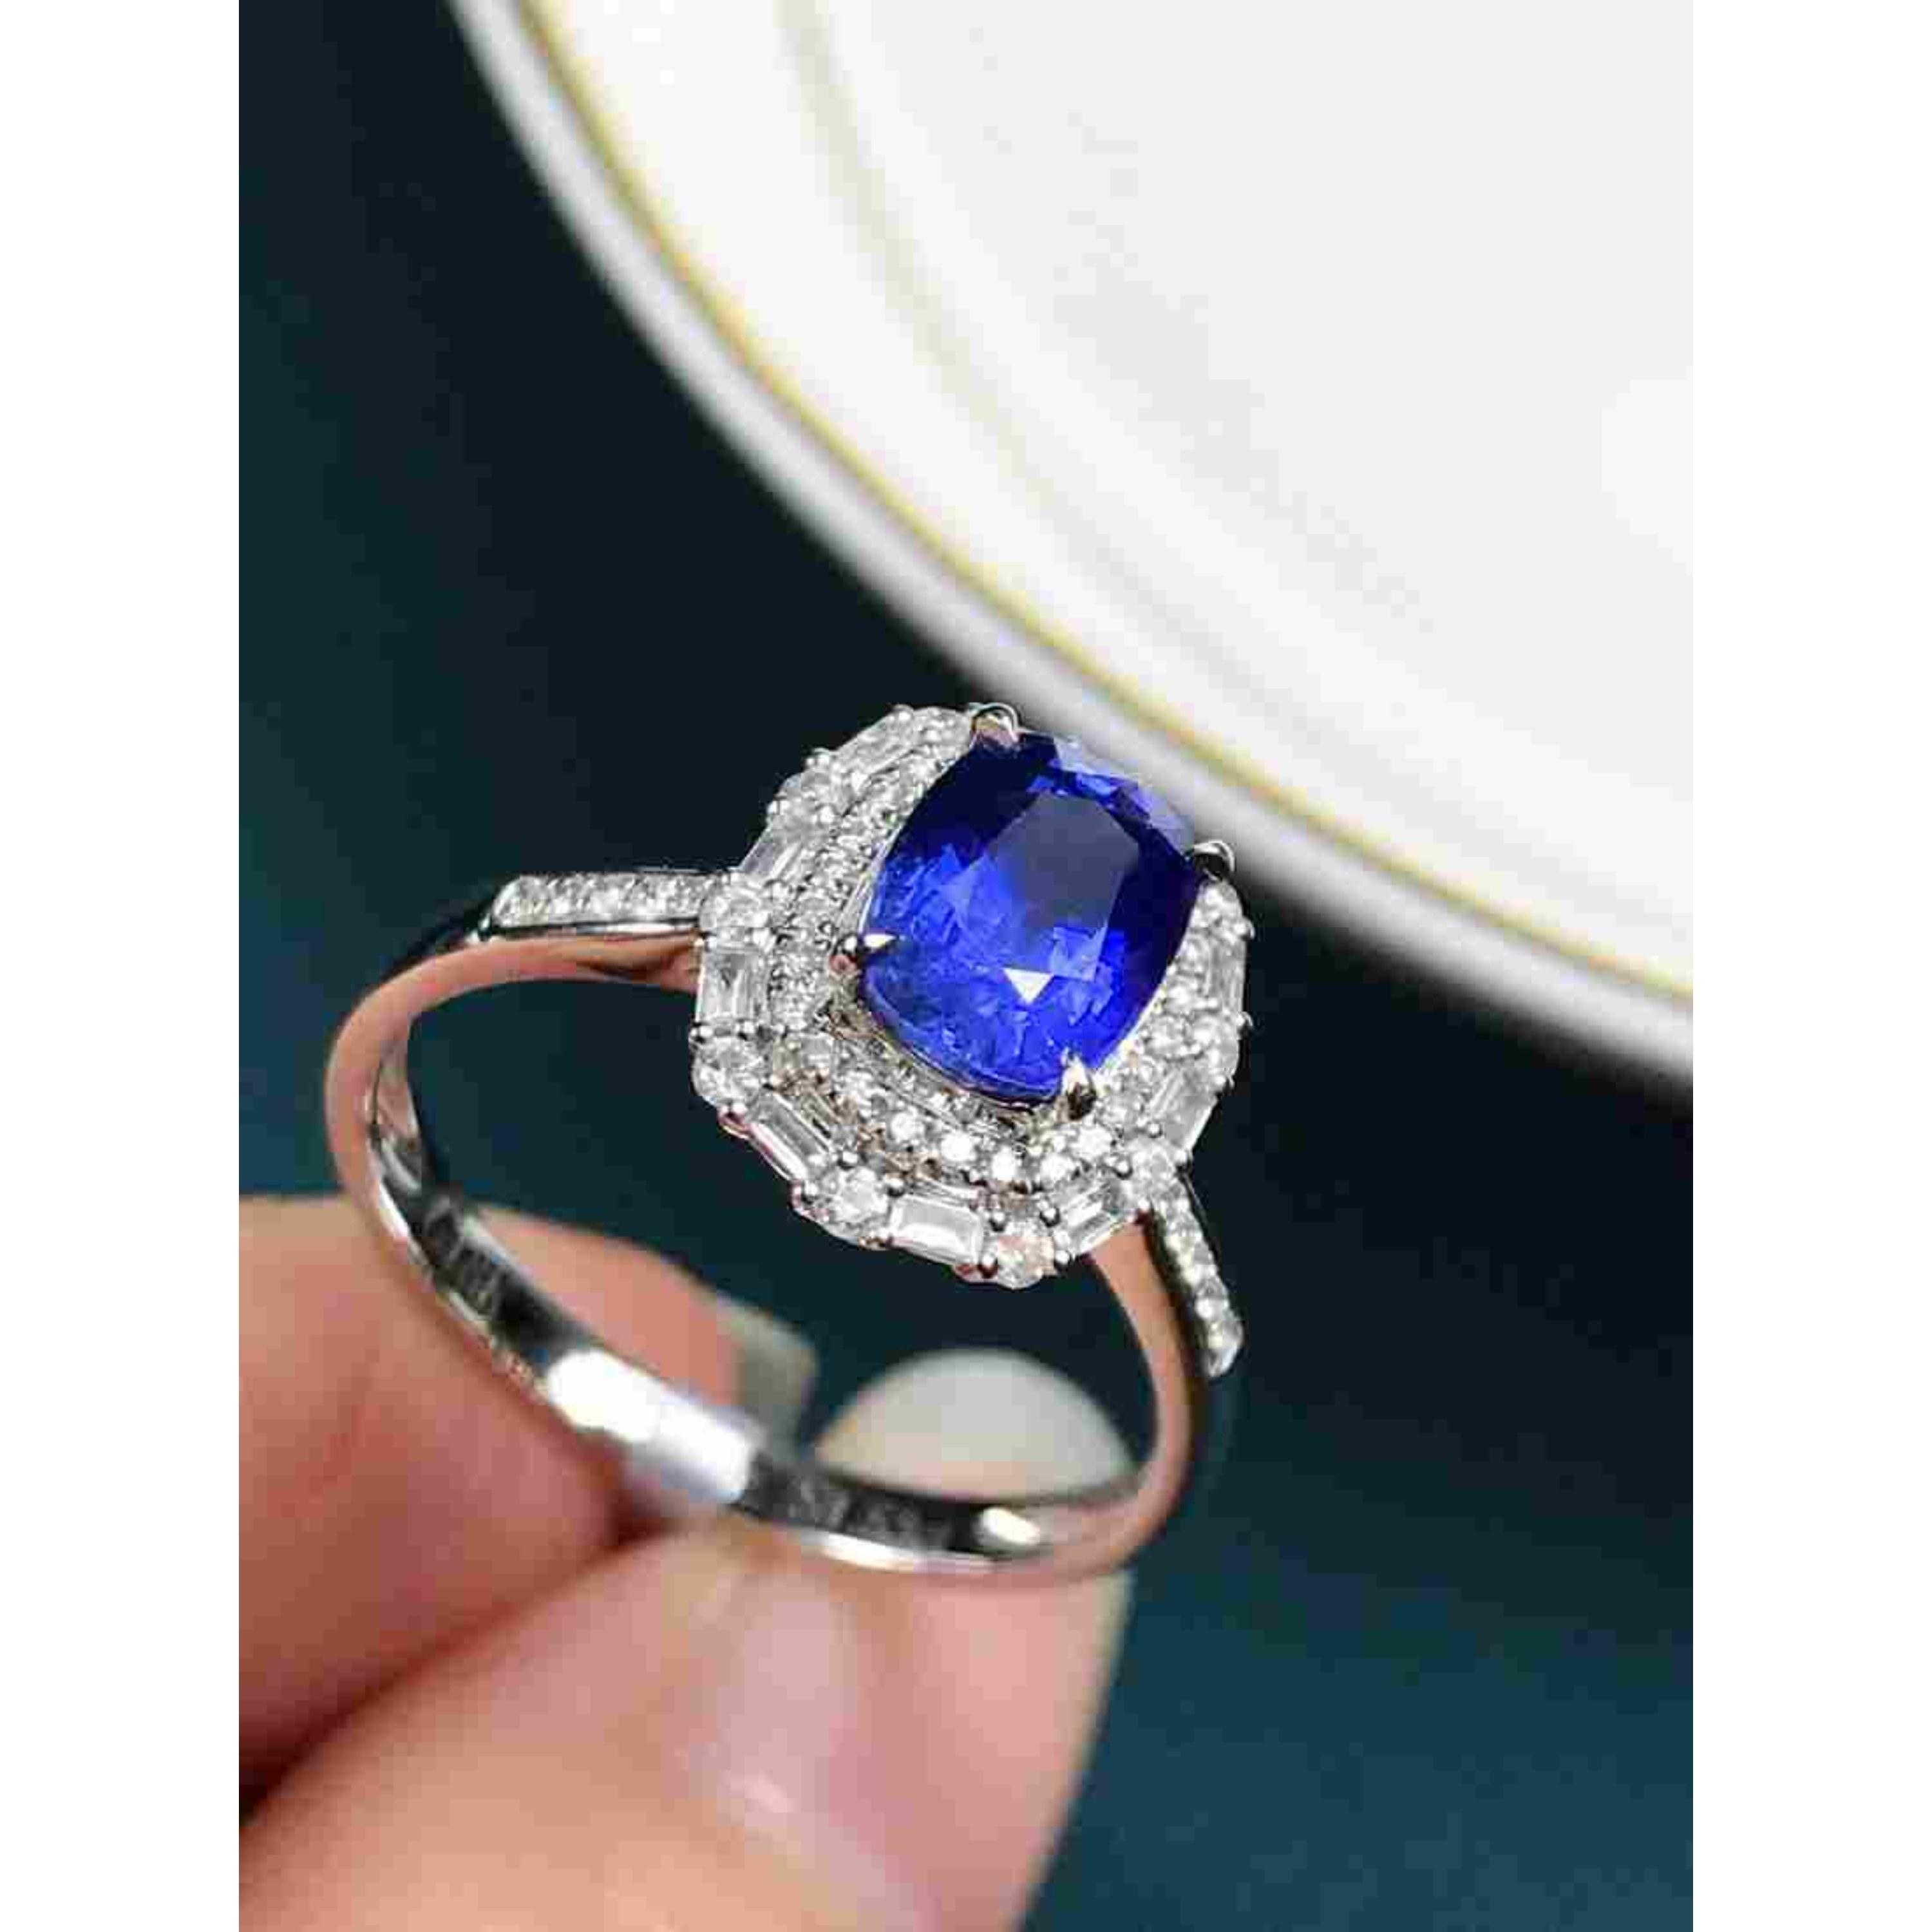 For Sale:  Natural Cushion Cut Sapphire Engagement Ring, Diamond Wedding Ring 6